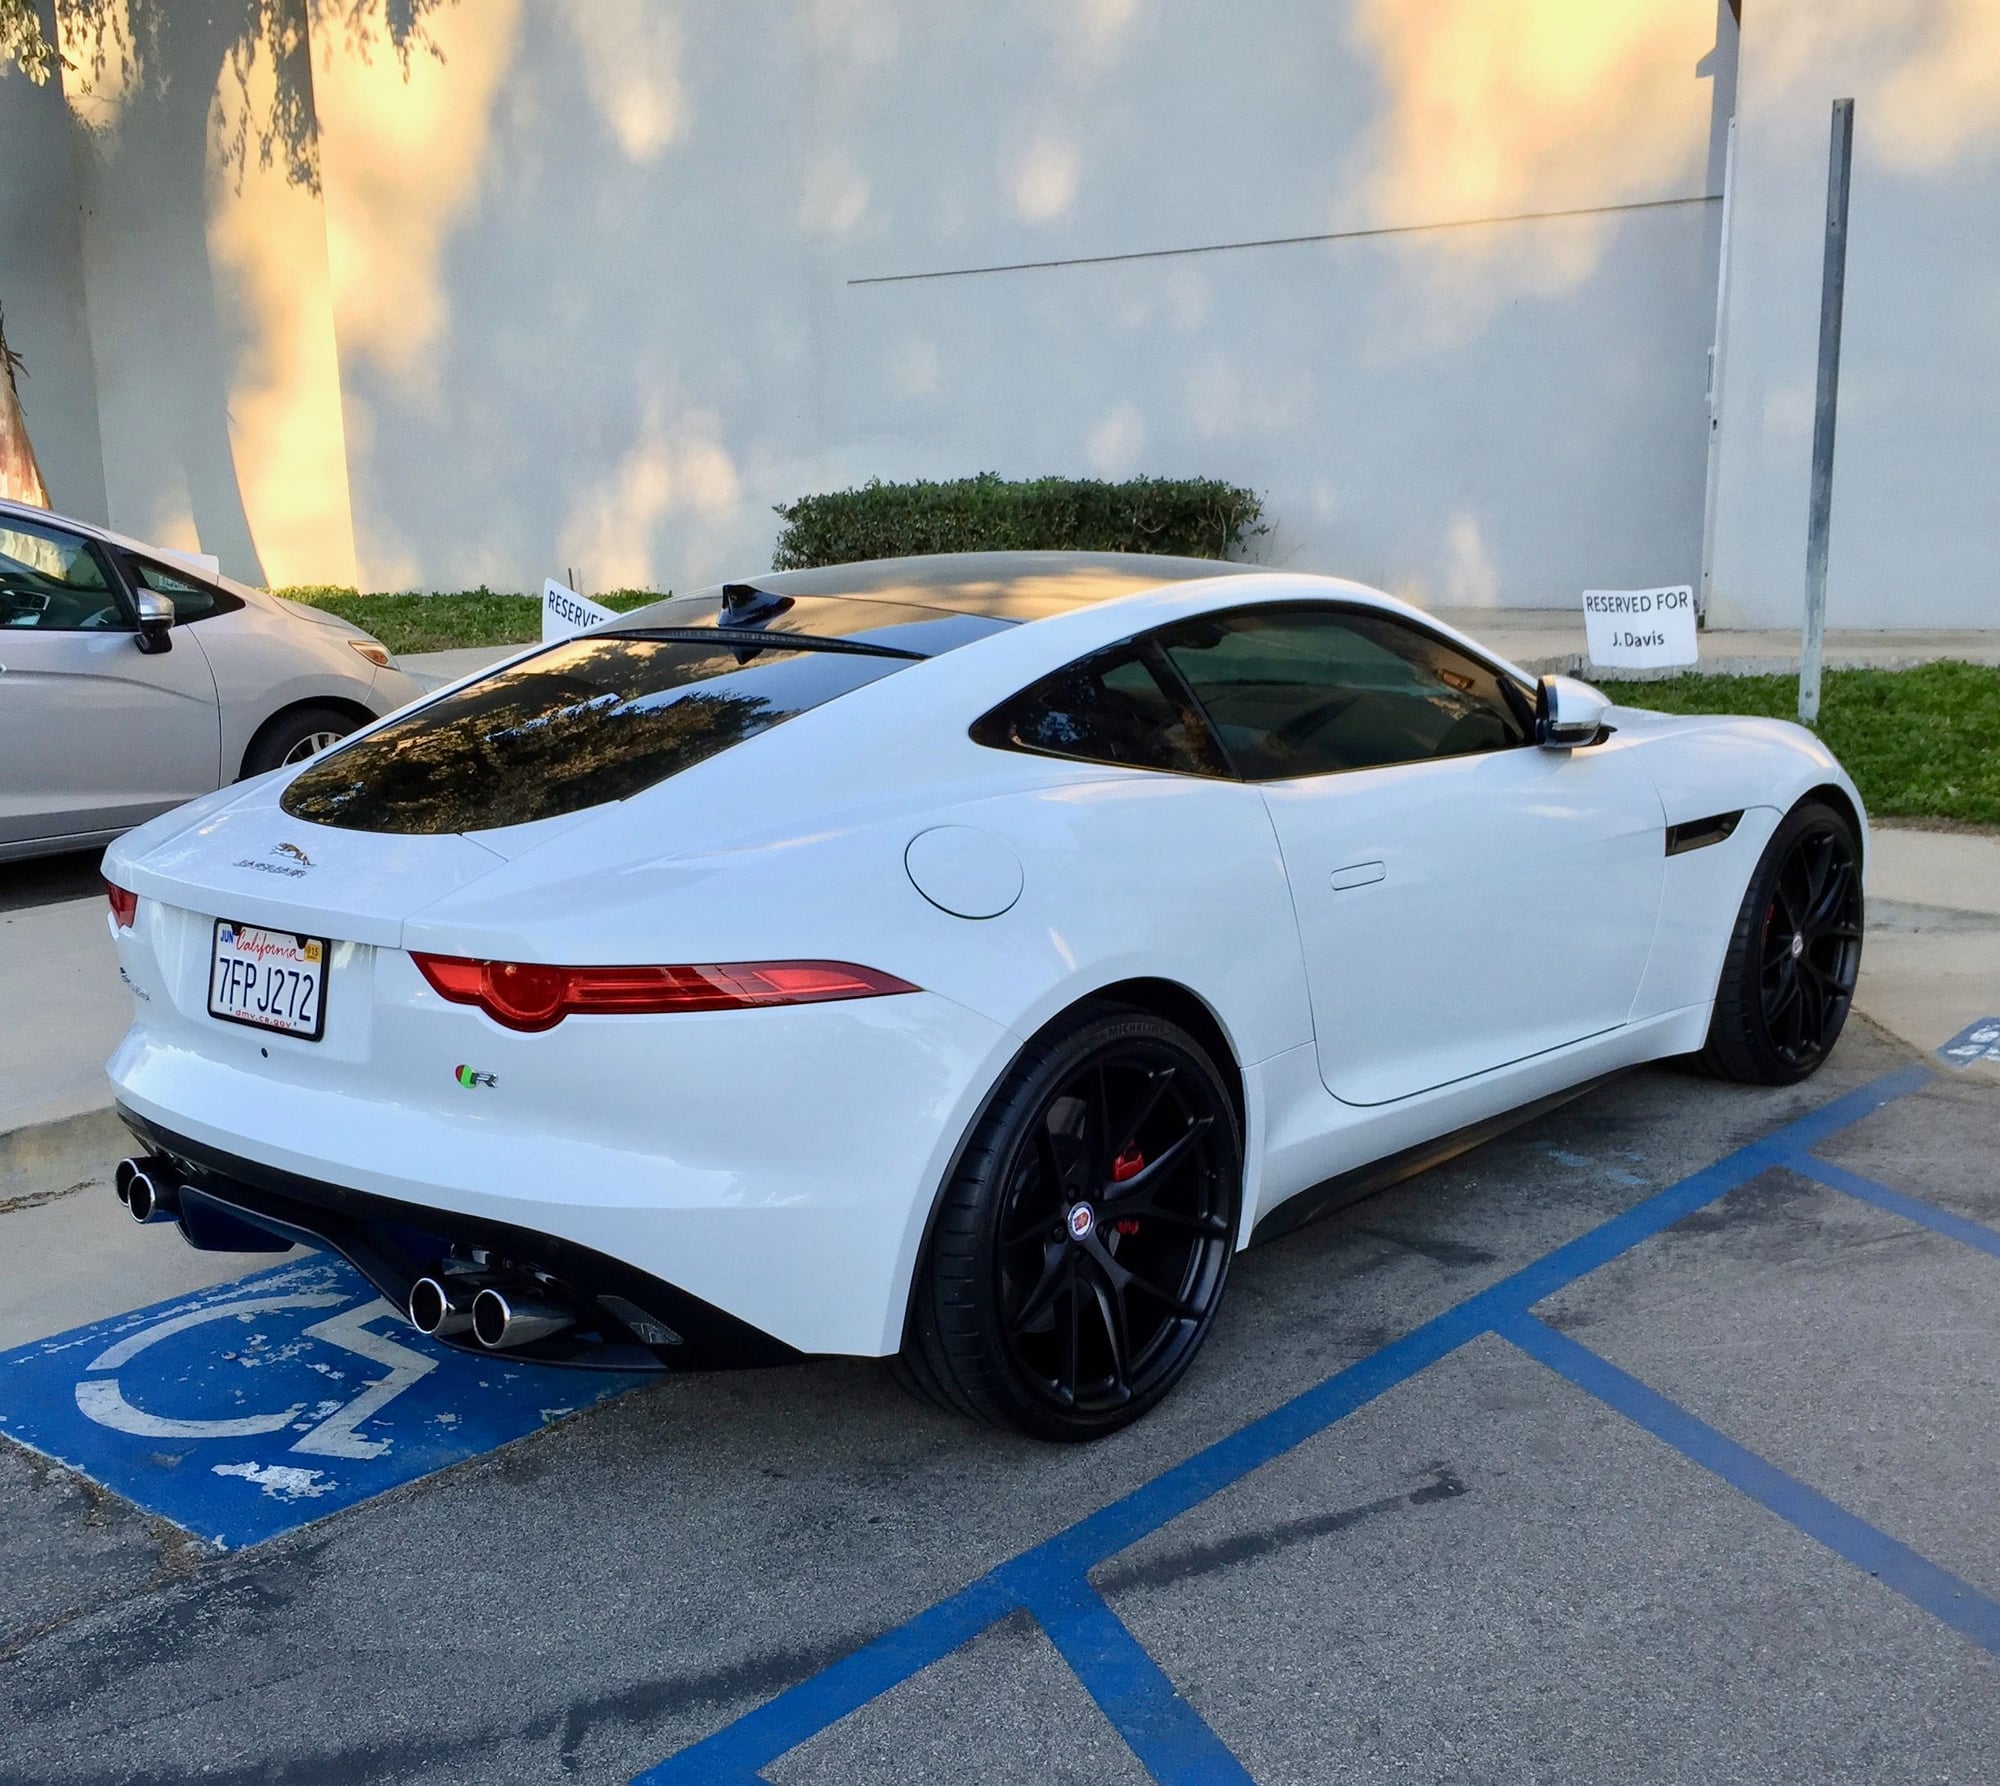 Wheels and Tires/Axles - FS: HRE P101 Black Forged 21" Wheels F-Type - Used - 2014 to 2019 Jaguar F-Type - Los Angeles, CA 91604, United States